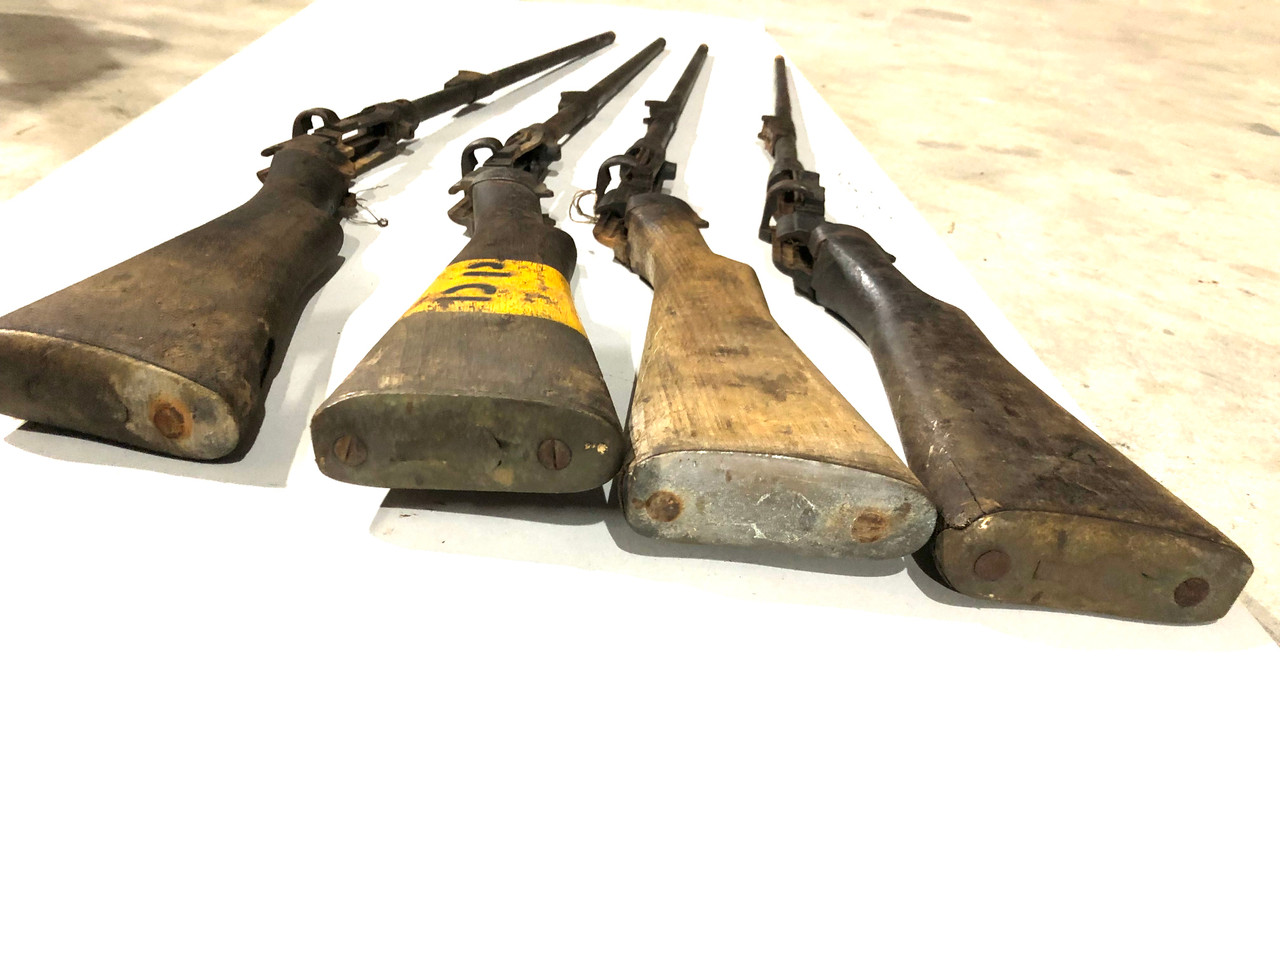 Lot 22: 4 x Enfield No1 MKIII DP Barreled Receivers with Cut Barrels (FFL Required)